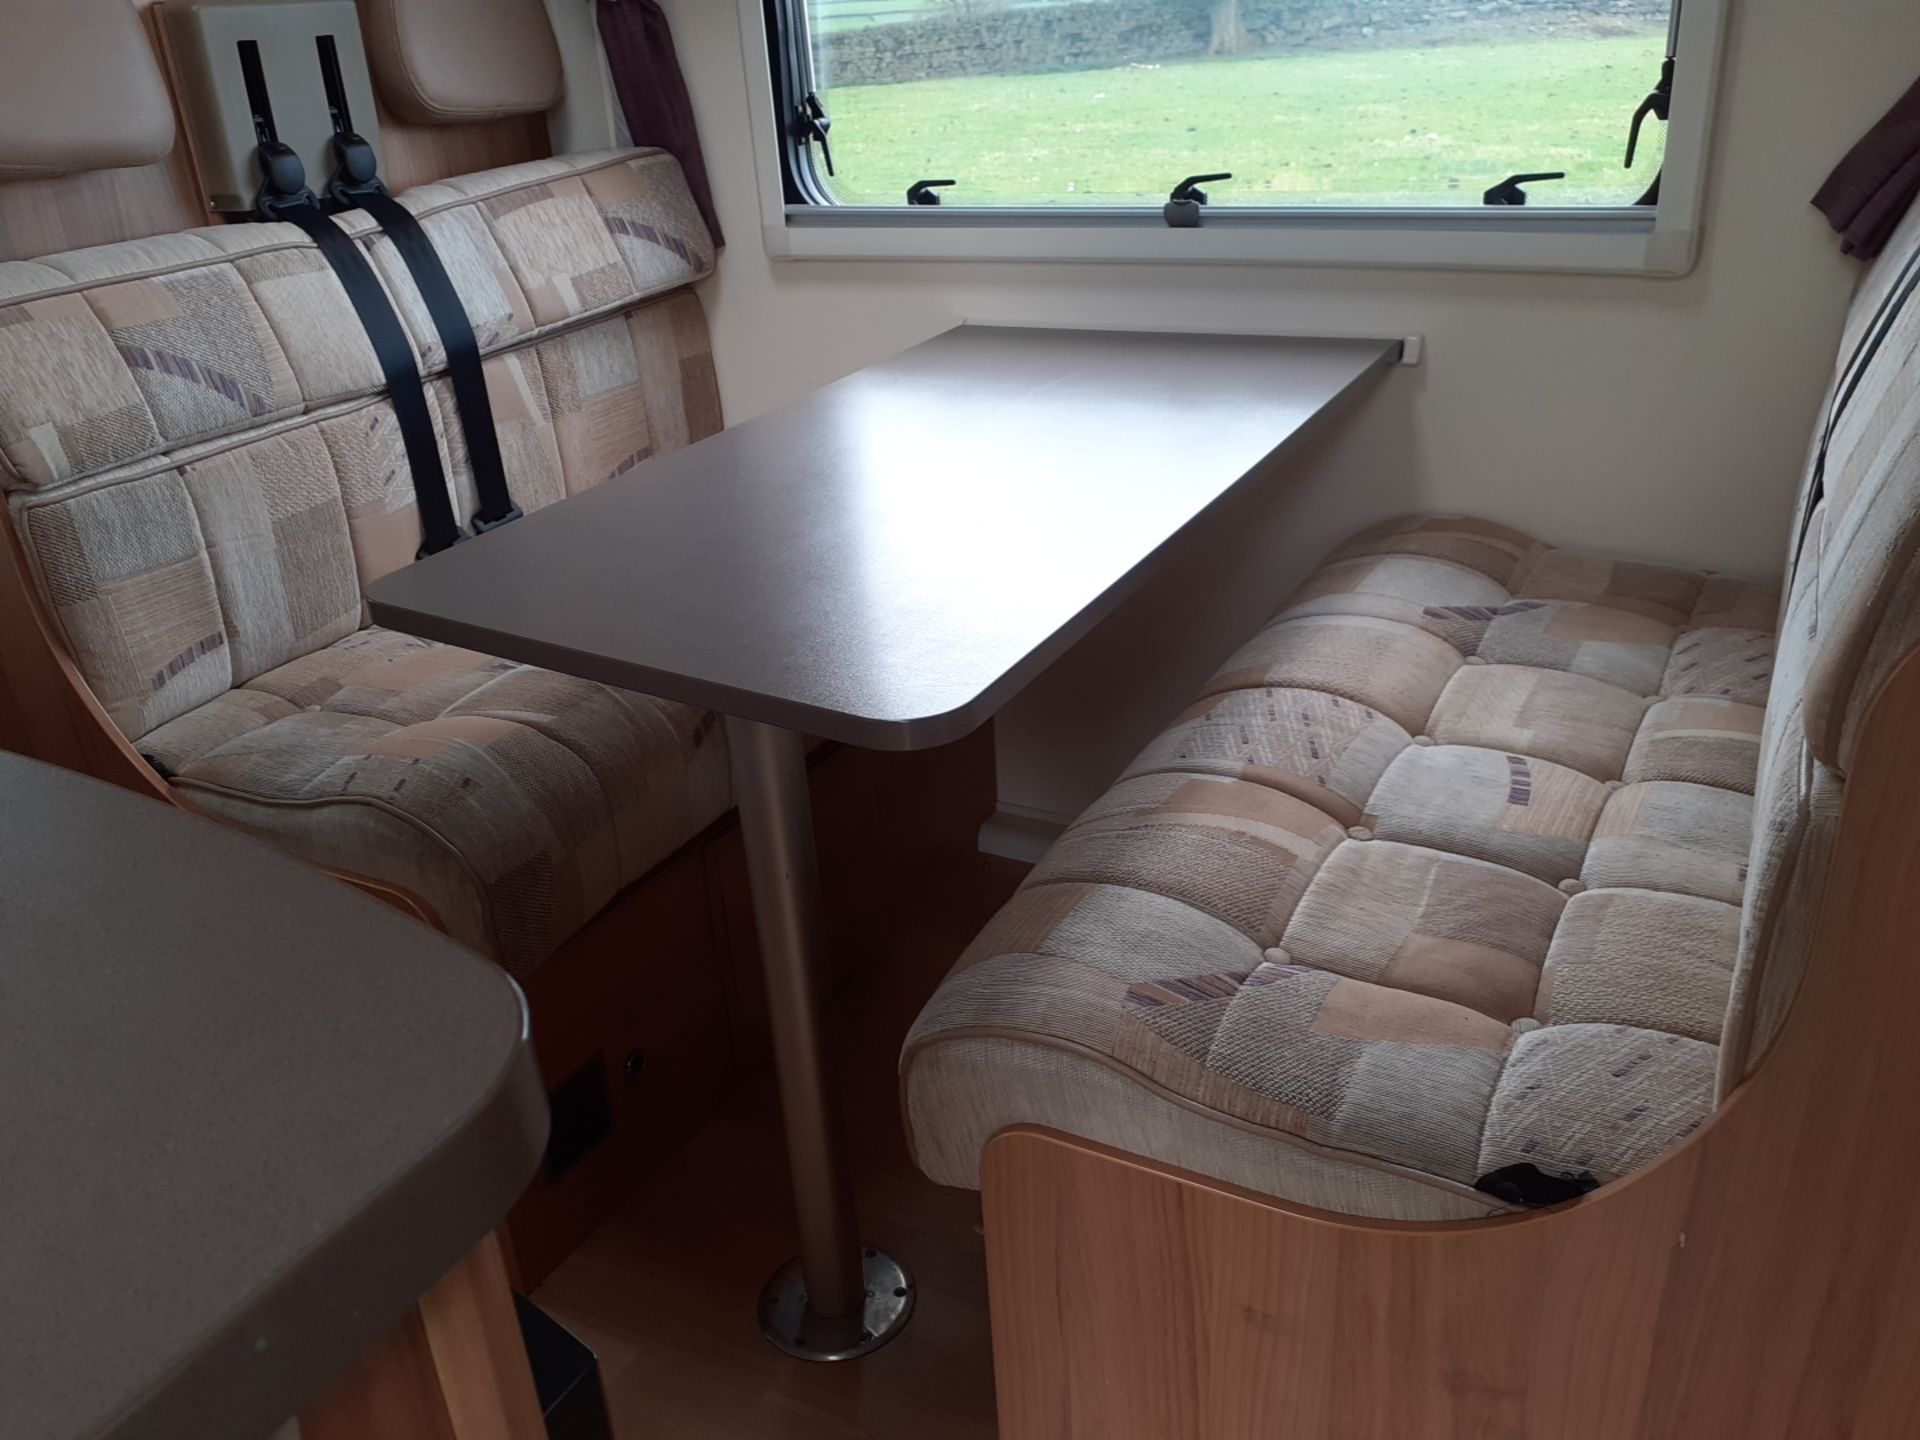 2012 BAILEY APPROACH 760 SE LUXURY 6 BERTH MOTORHOME £10K OF EXTRAS, 30,000 MILES FROM NEW - Image 23 of 31